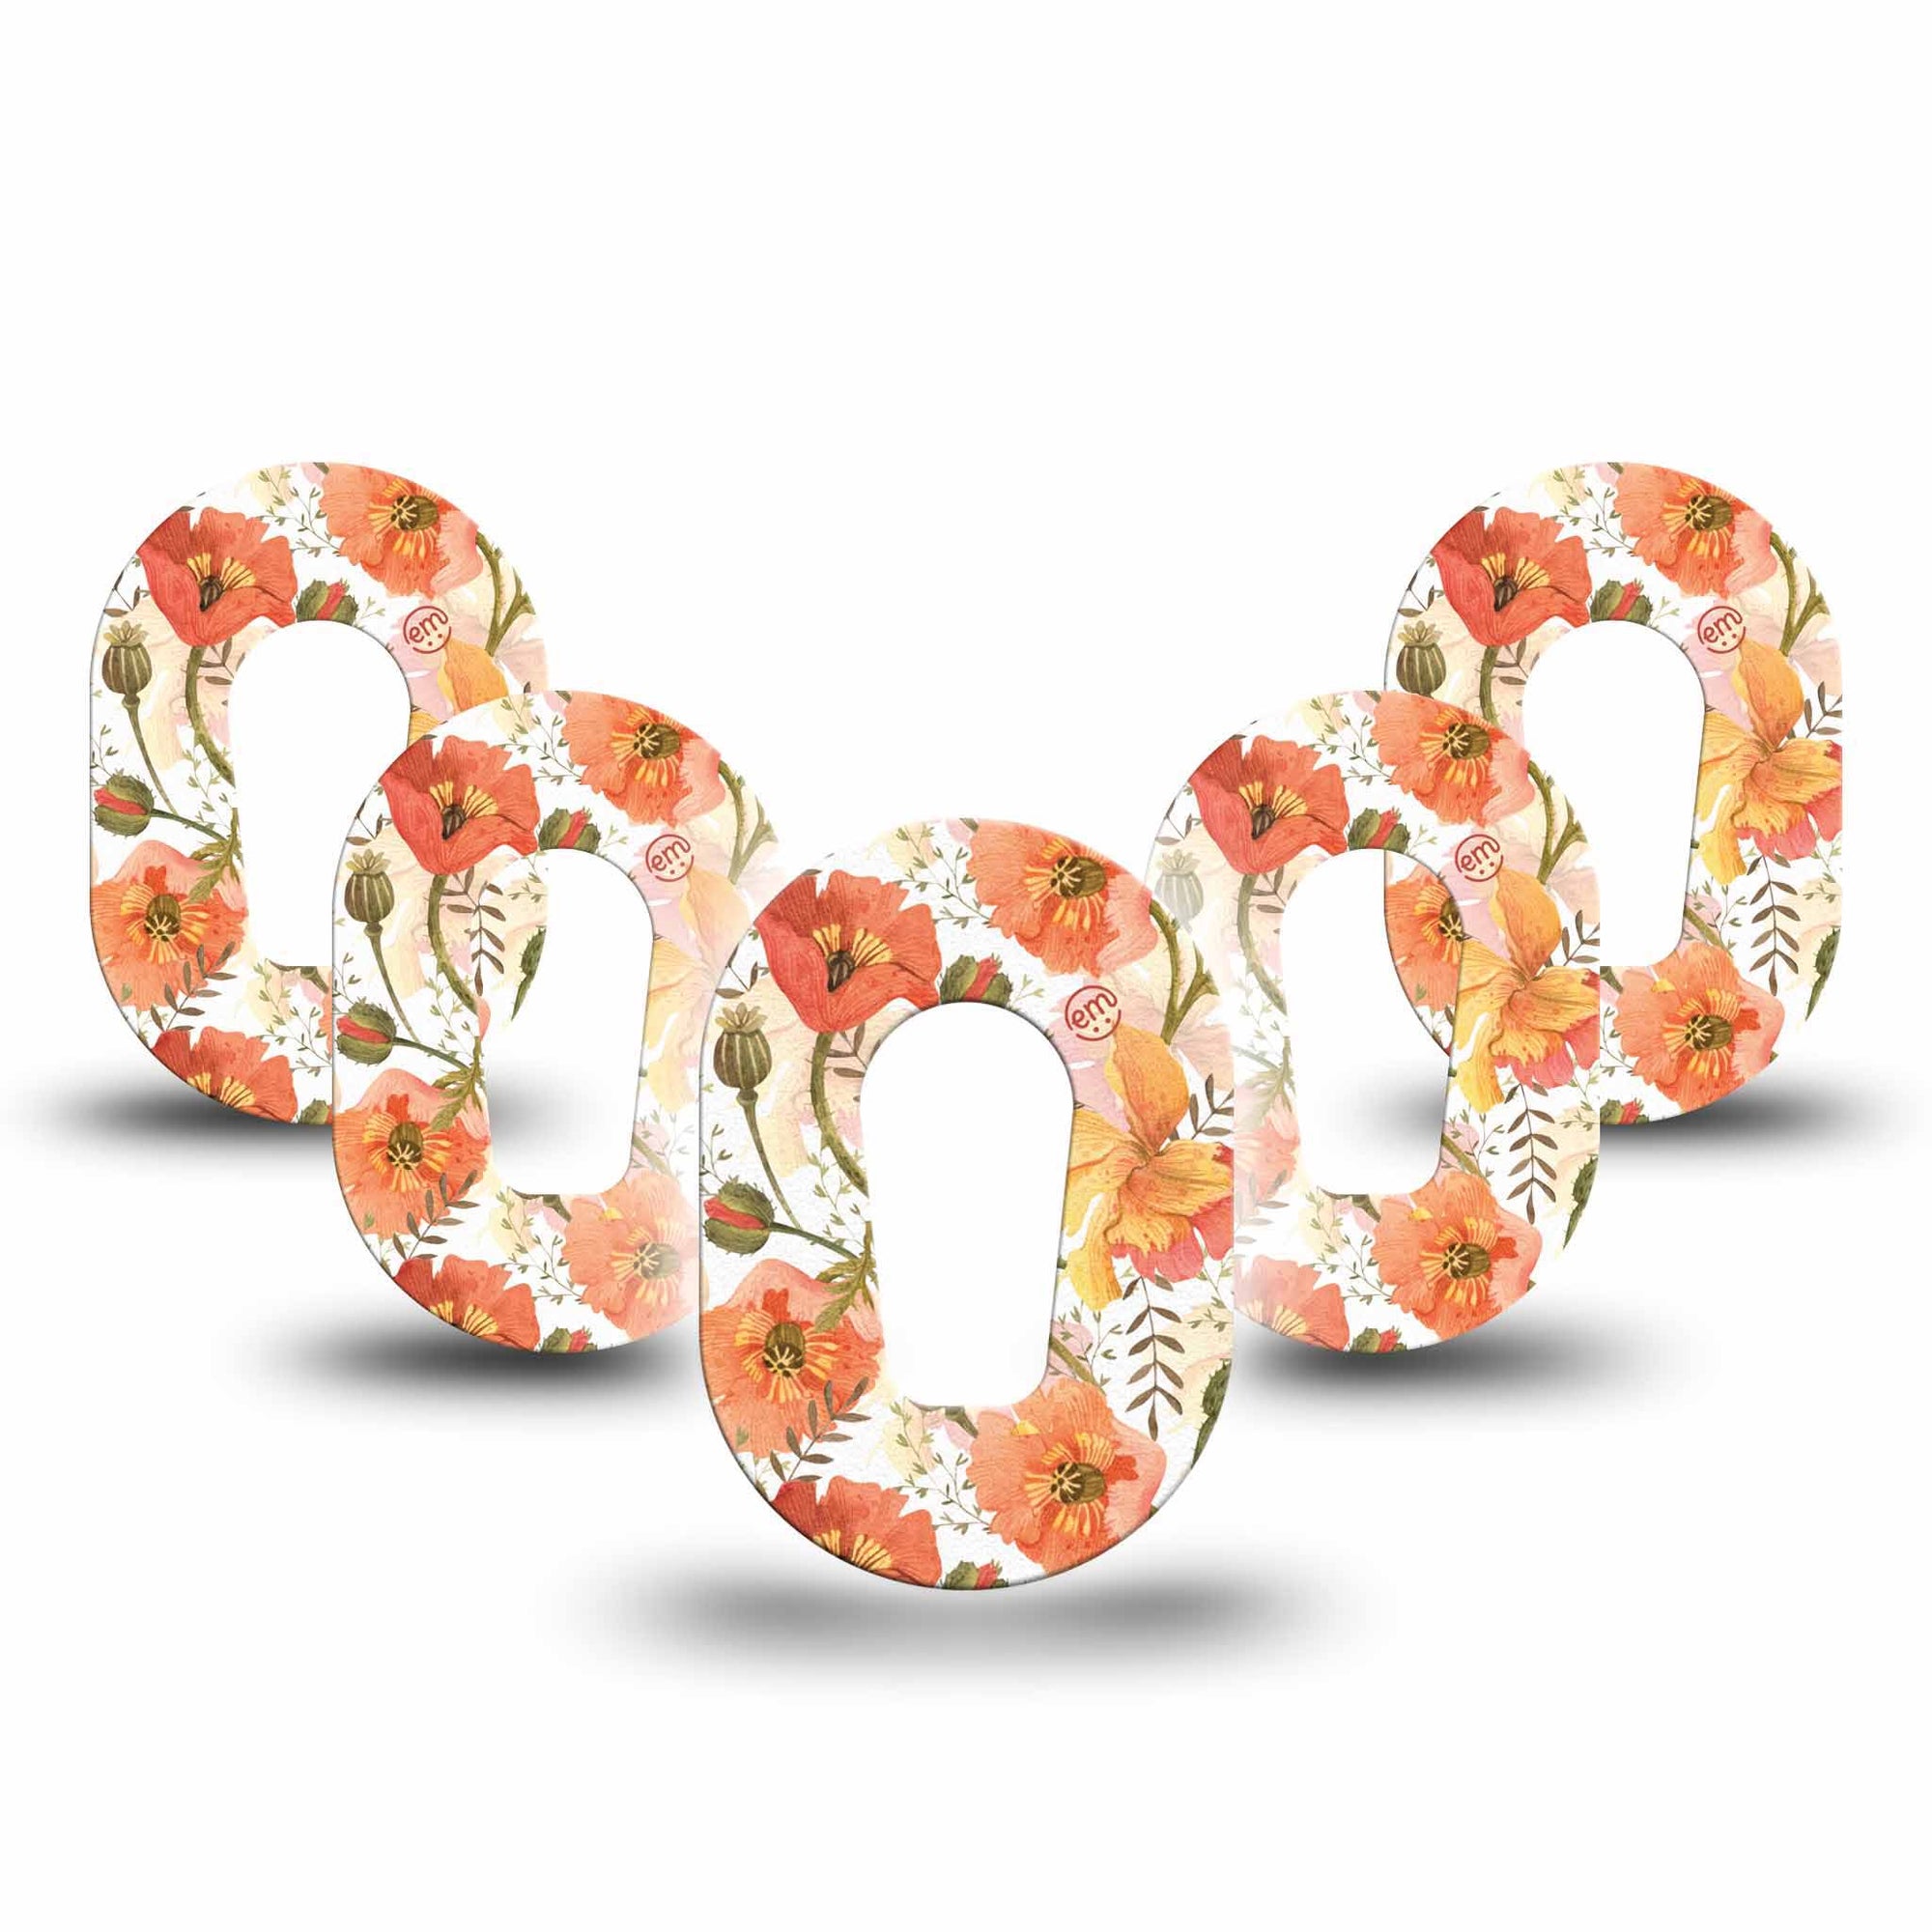 ExpressionMed Peachy Blooms G6 Mini Tapes